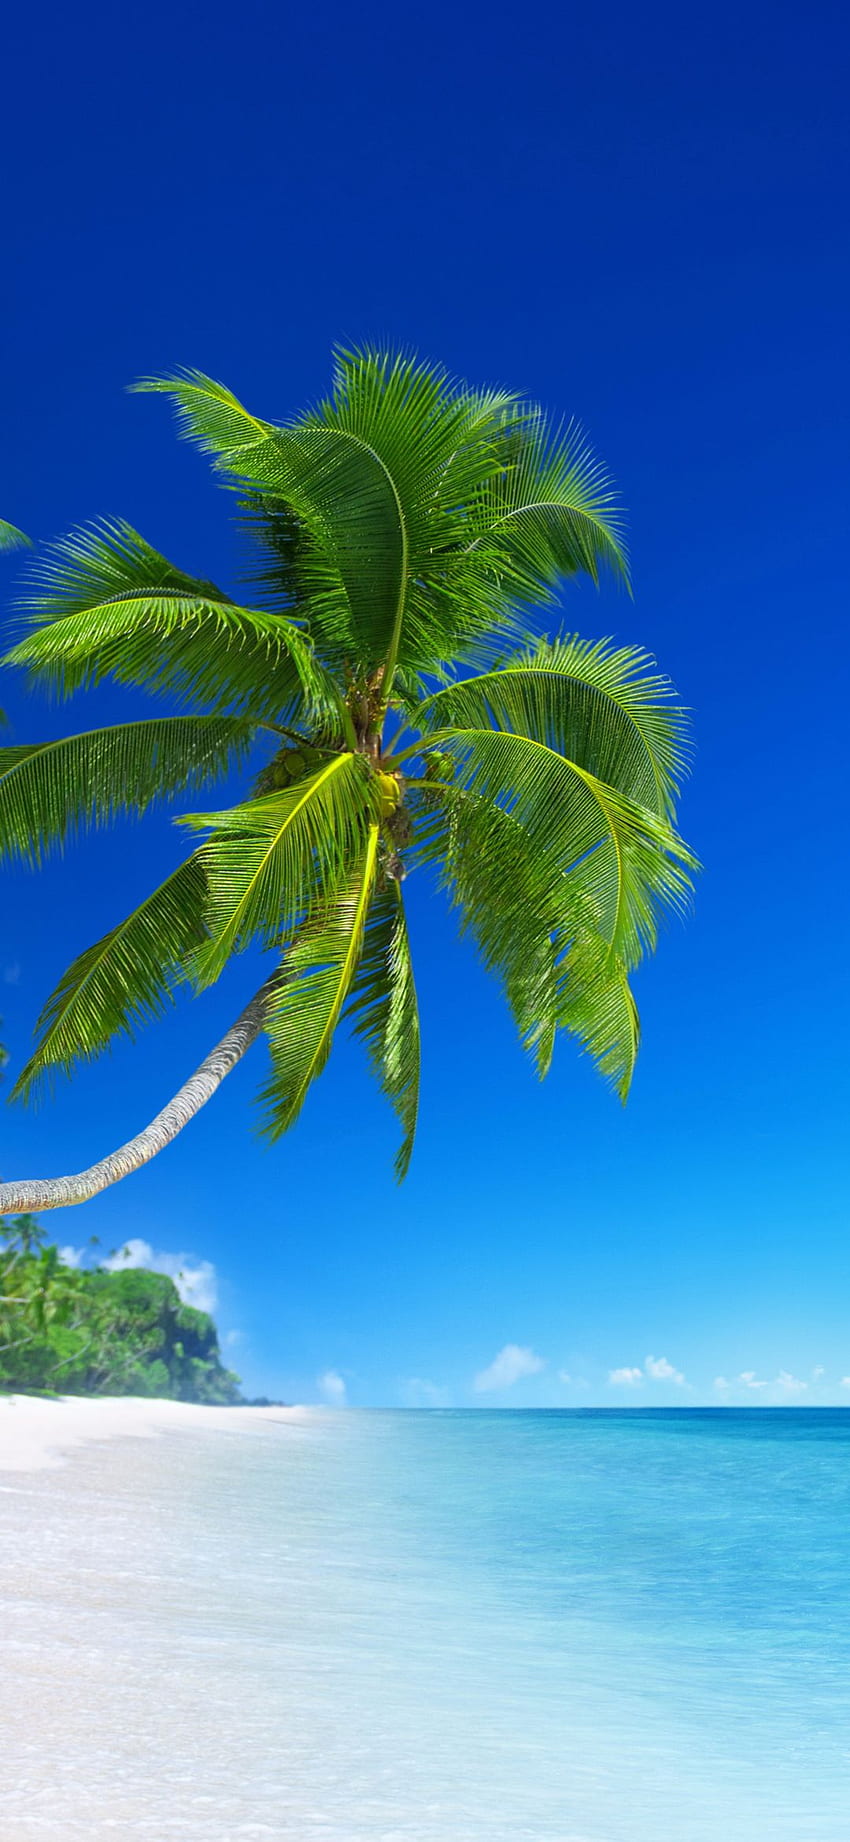 Wallpaper Green Palm Tree on Beach During Daytime Background  Download  Free Image